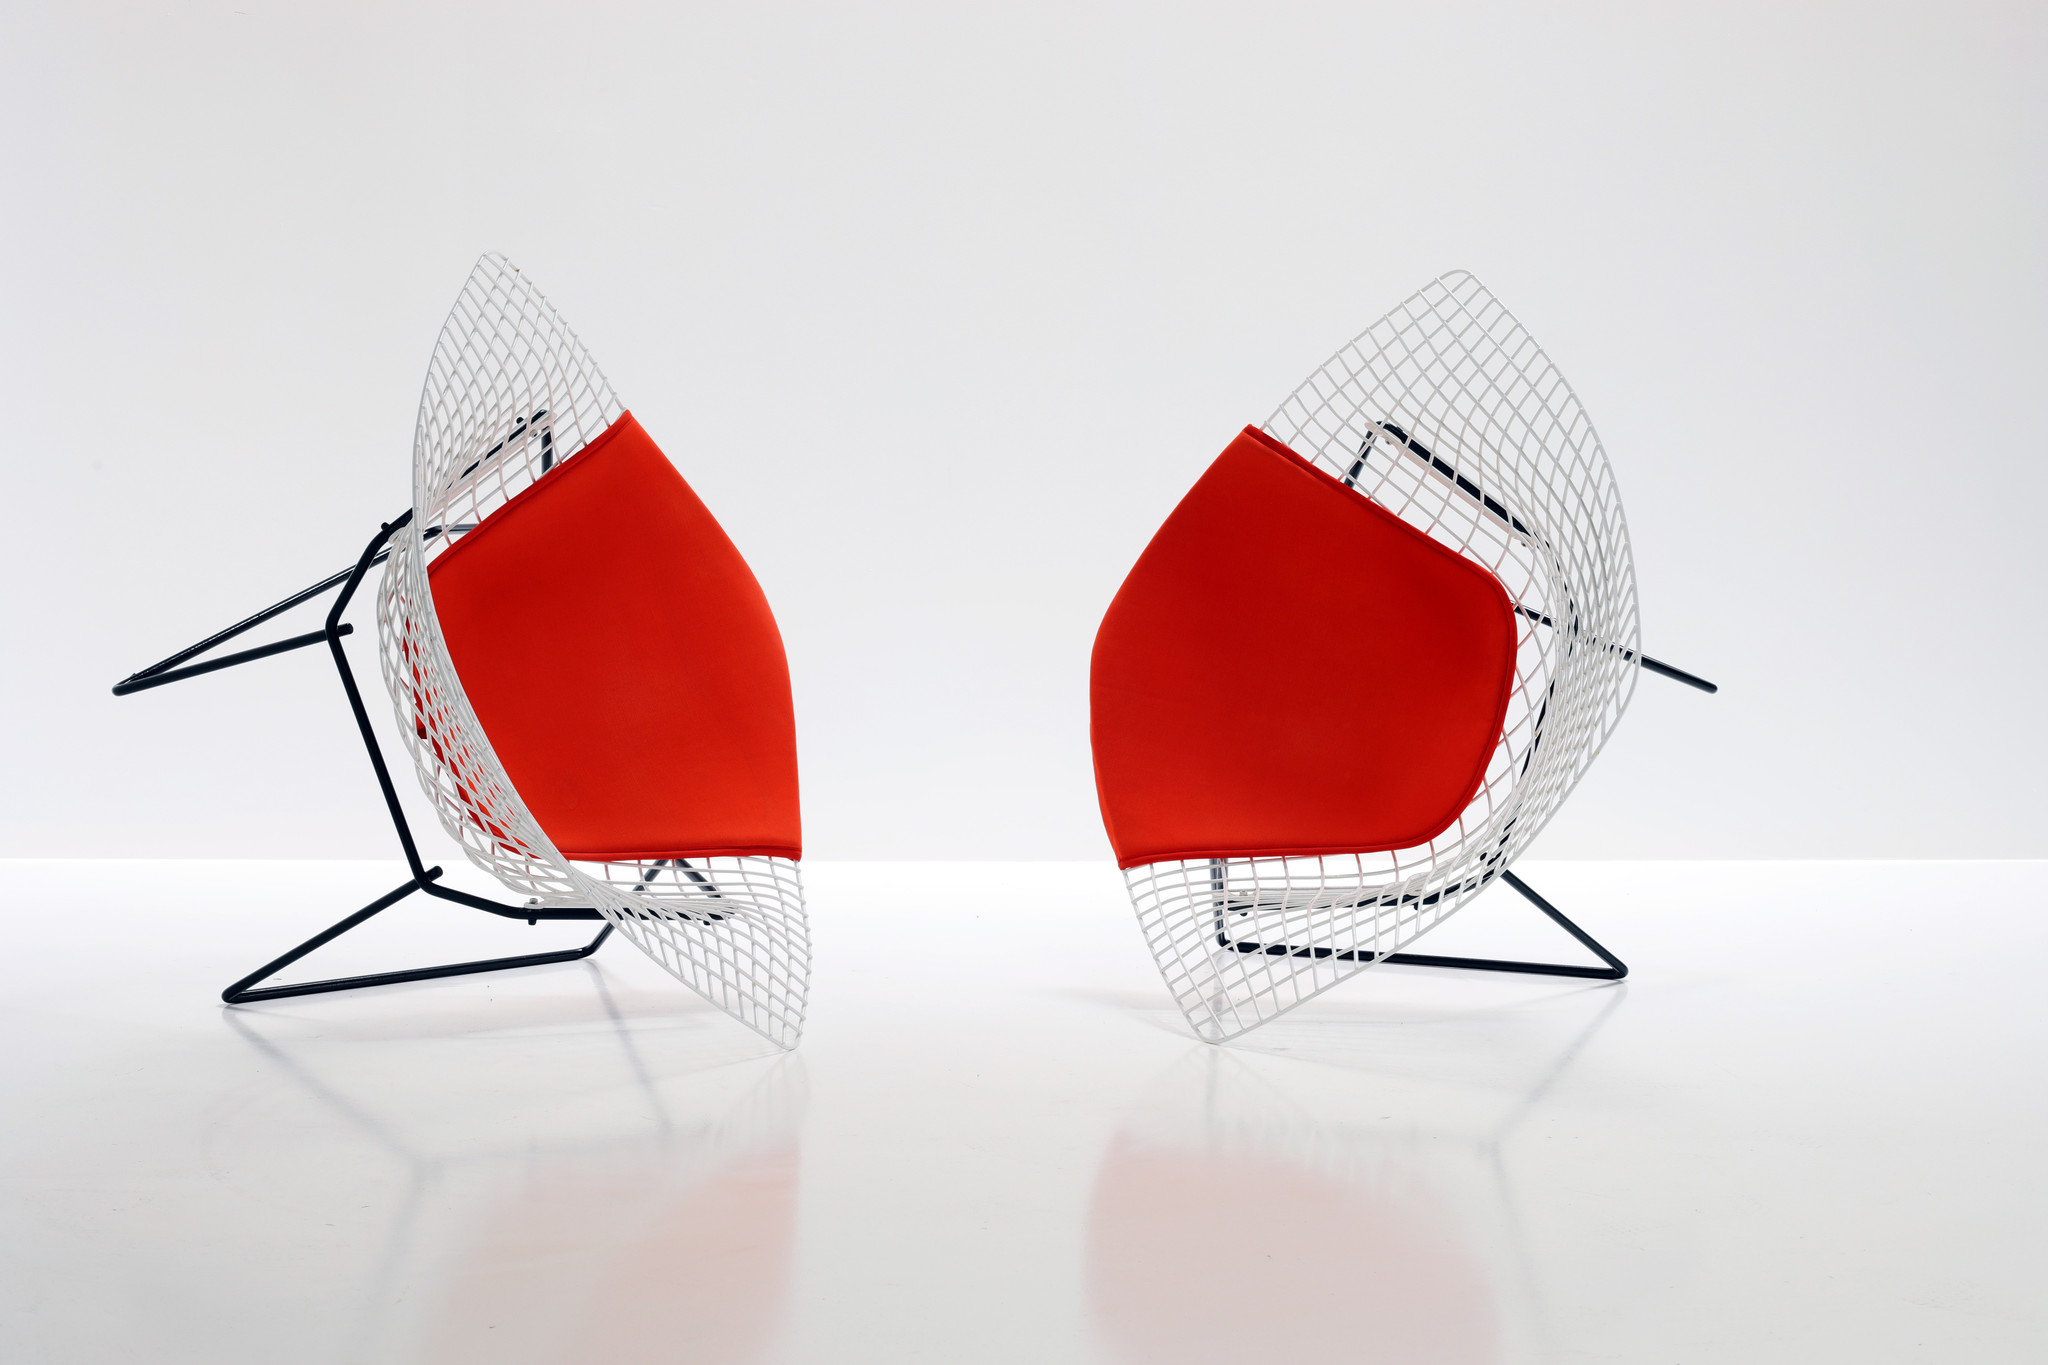 Diamond chairs by Harry Bertoia for Knoll, 1952